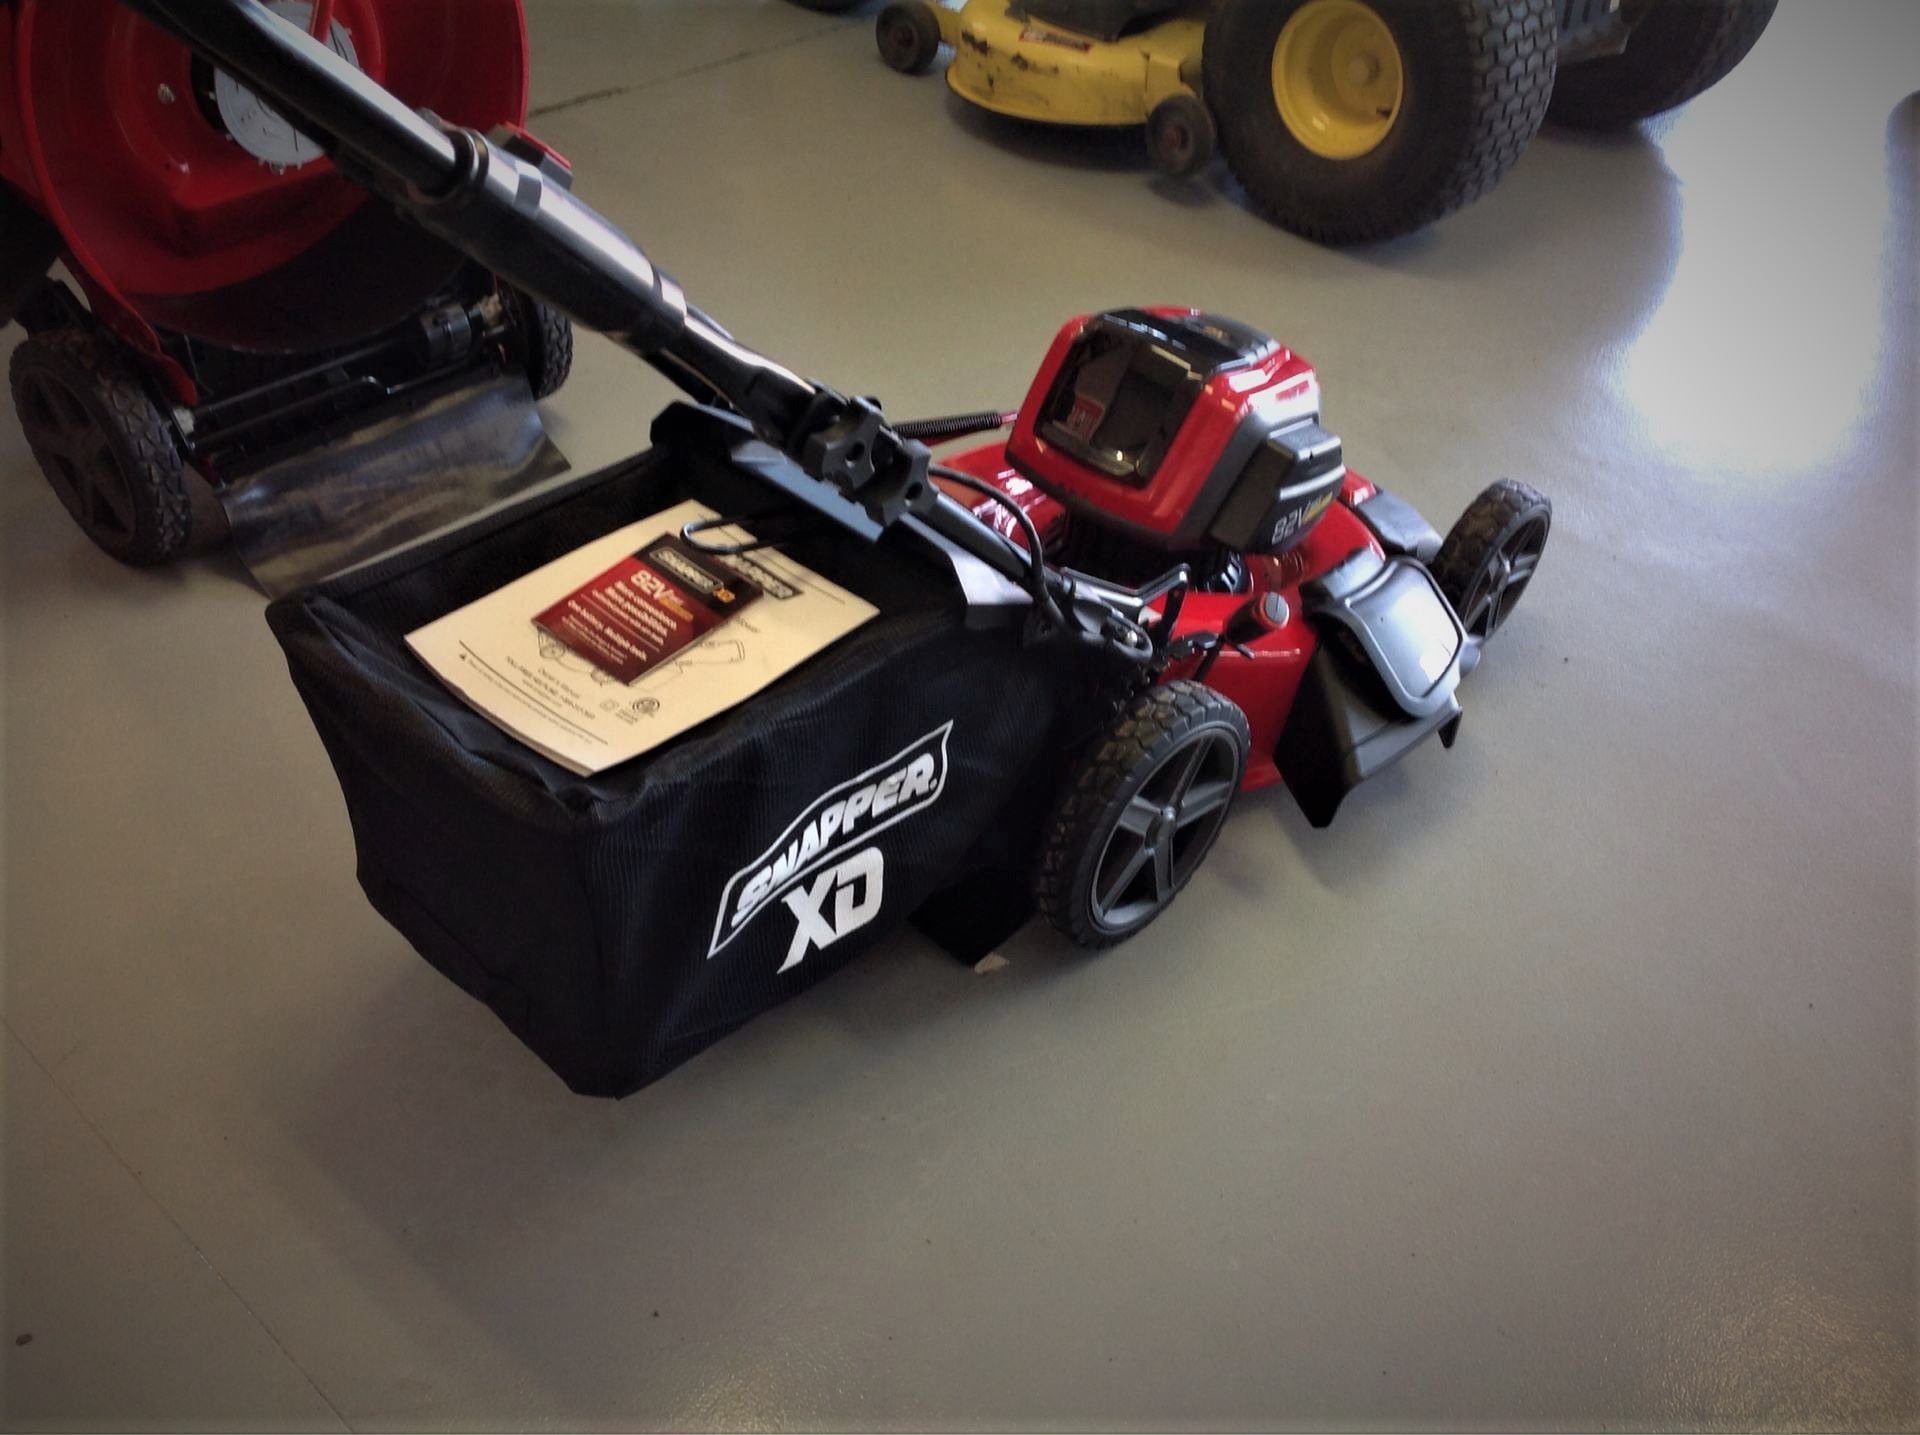 Snapper SXDWM82 21 in. 82V Max Lithium-Ion Cordless Push in Lafayette, Indiana - Photo 3